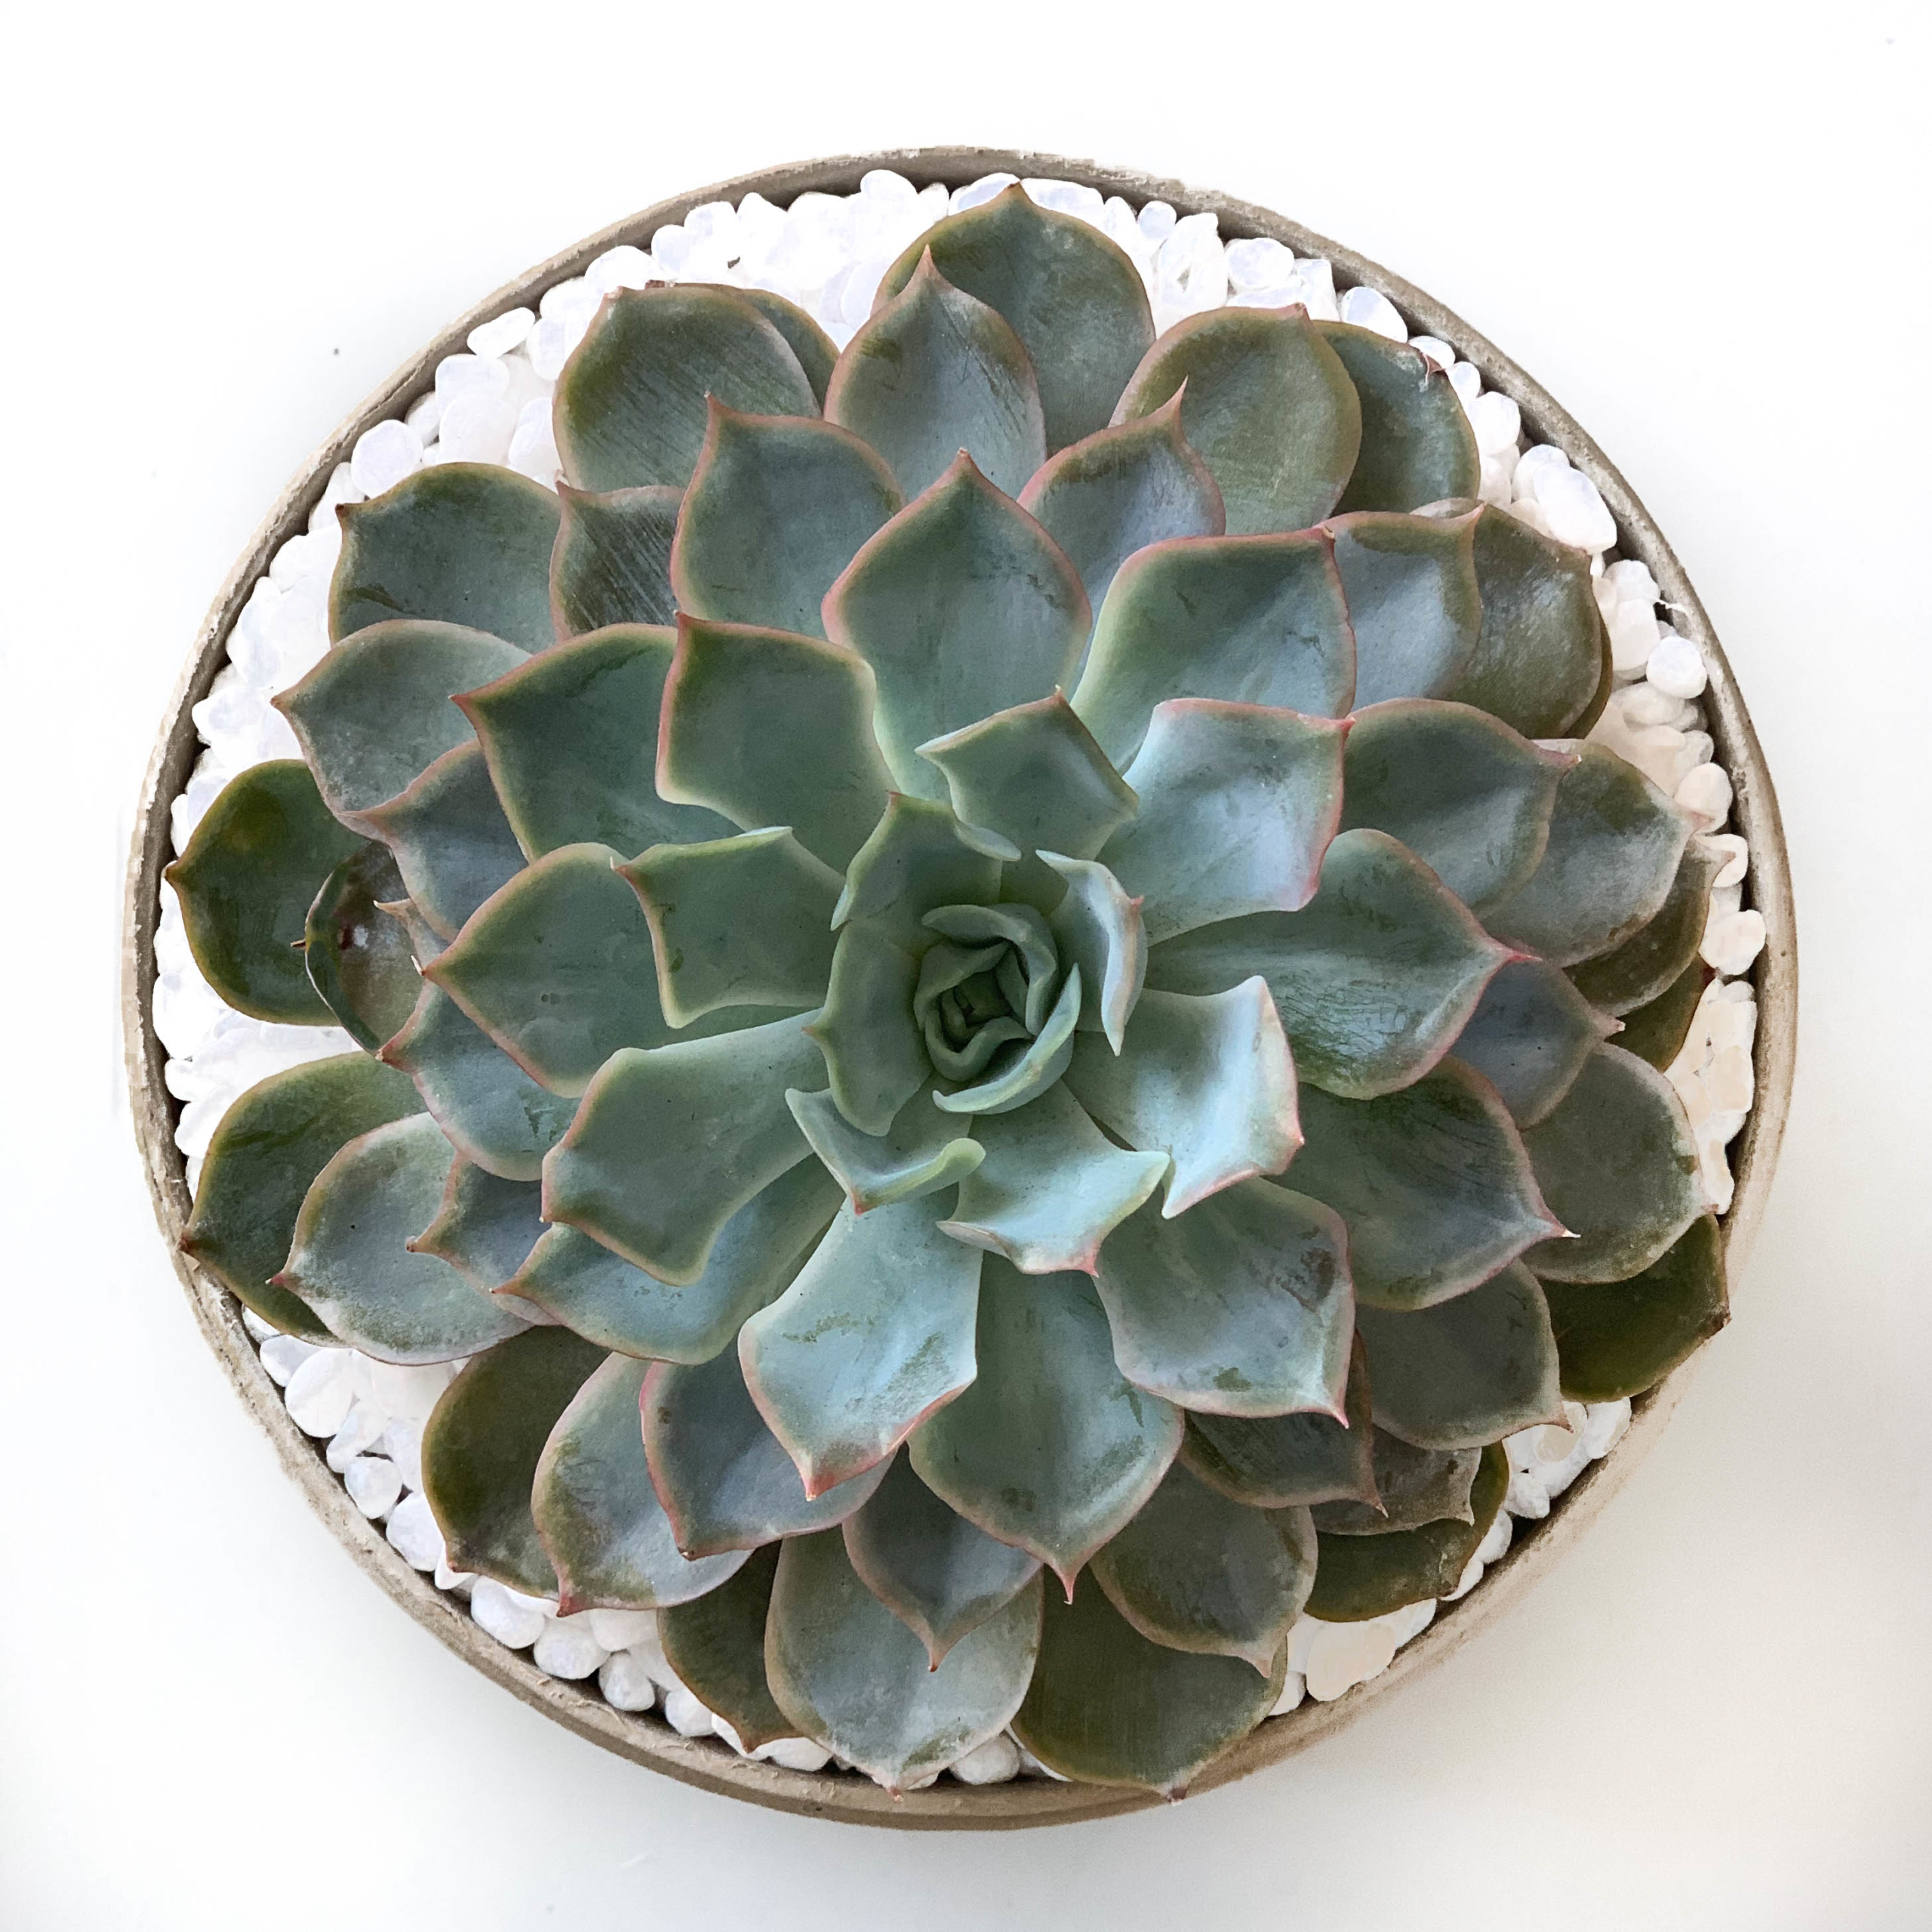 Midi Echeveria in a latte handmade pot, cute succulent. Biodegradable and recycled pot. Long-lasting and sustainable plant gift.